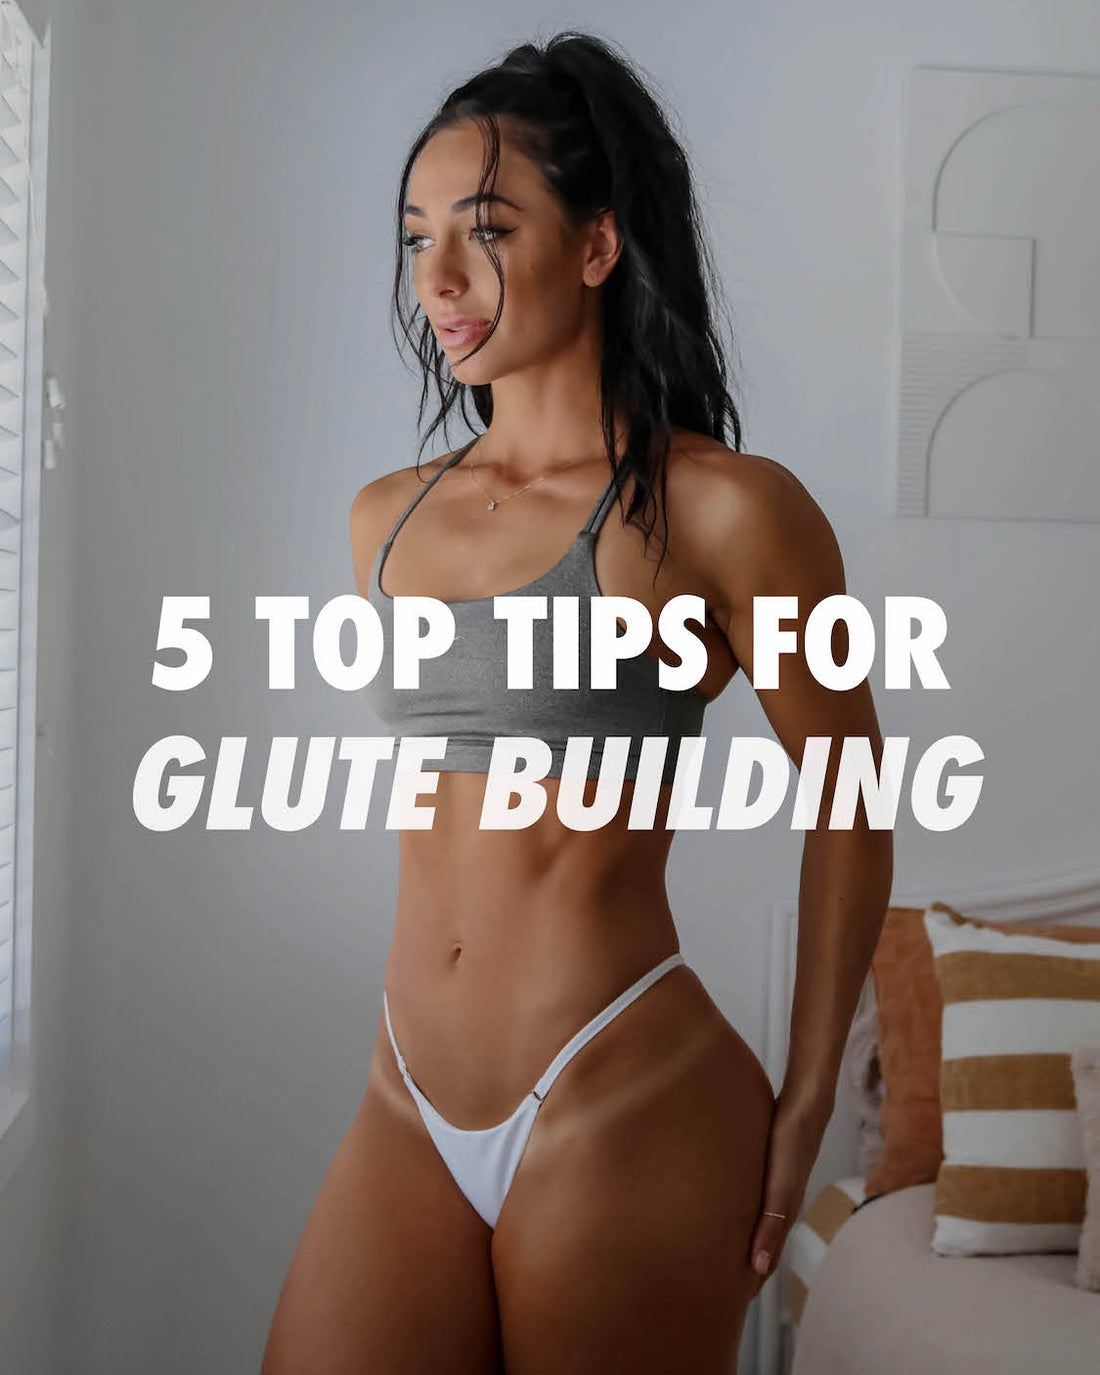 5 TOP TIPS FOR GLUTE BUILDING